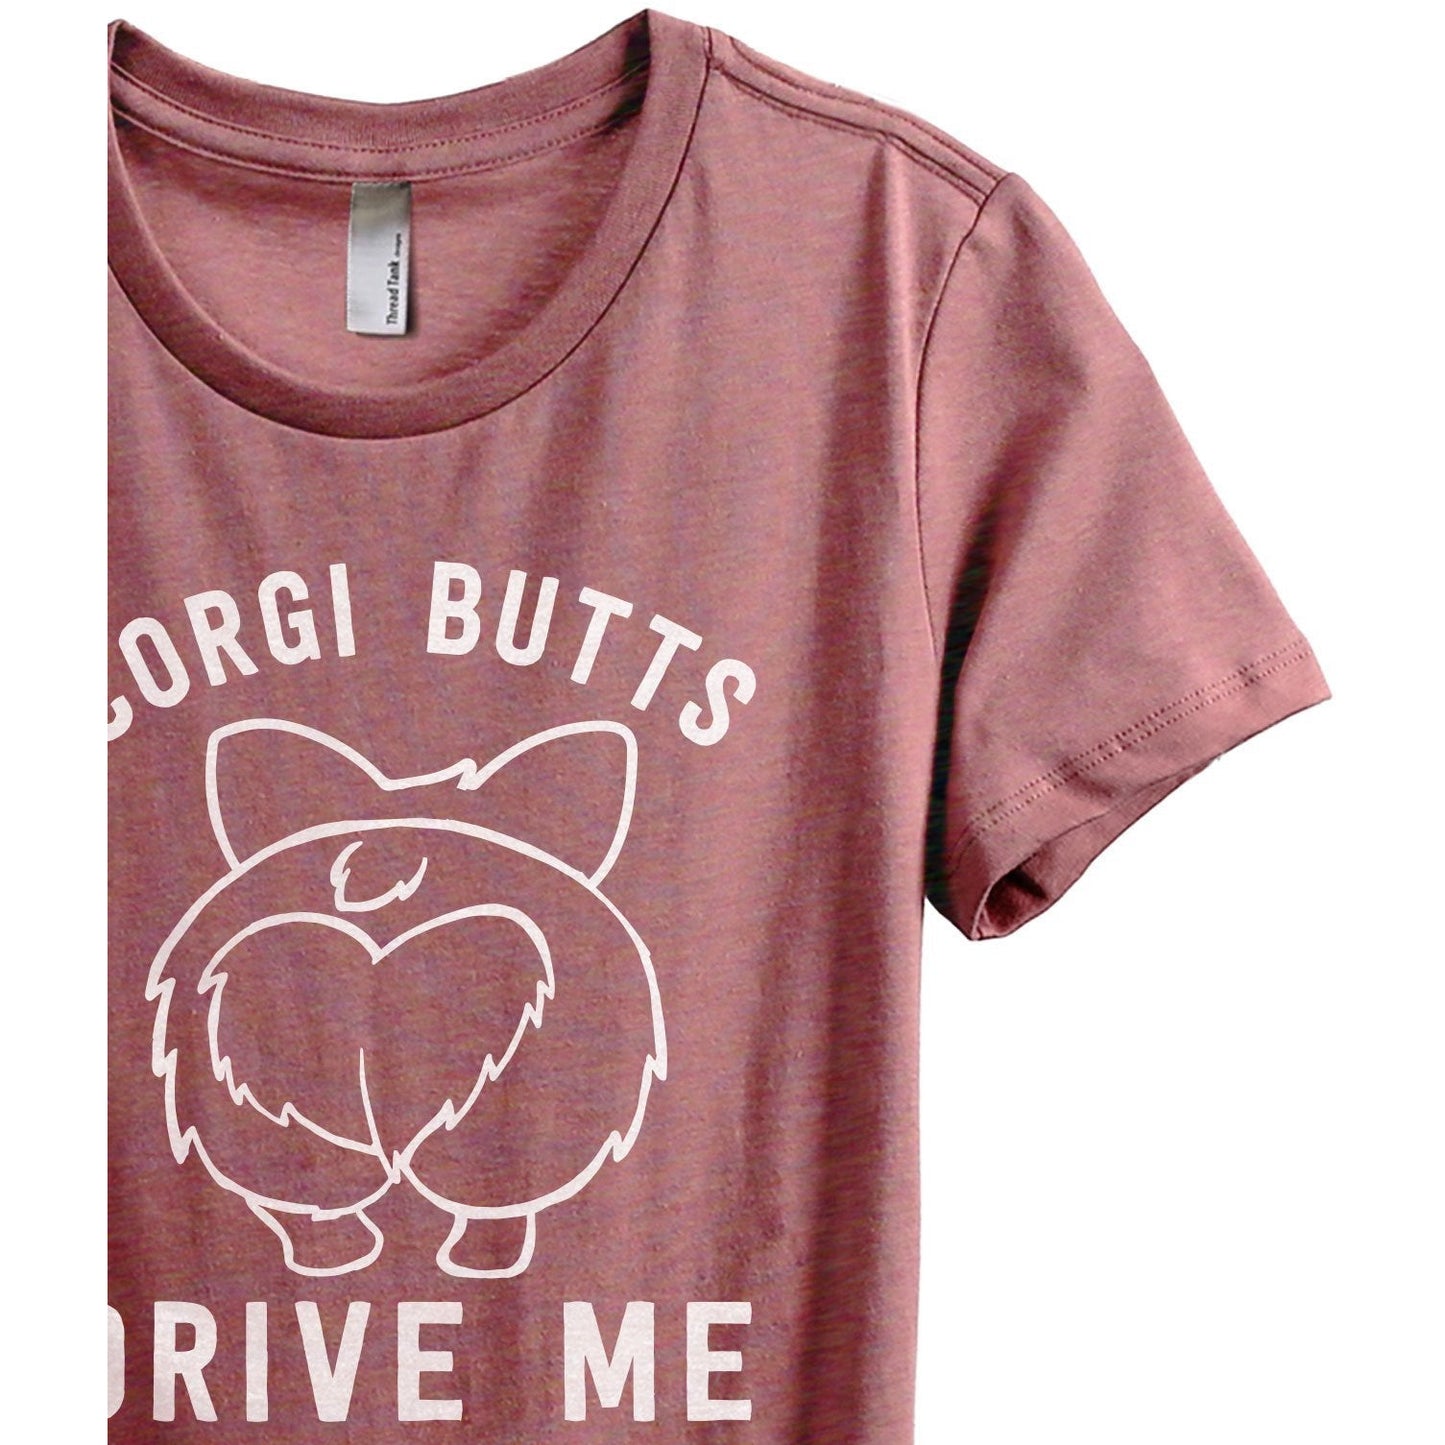 Corgi Butts Drive Me Nutts Women's Relaxed Crewneck T-Shirt Top Tee Heather Rouge Zoom Details
